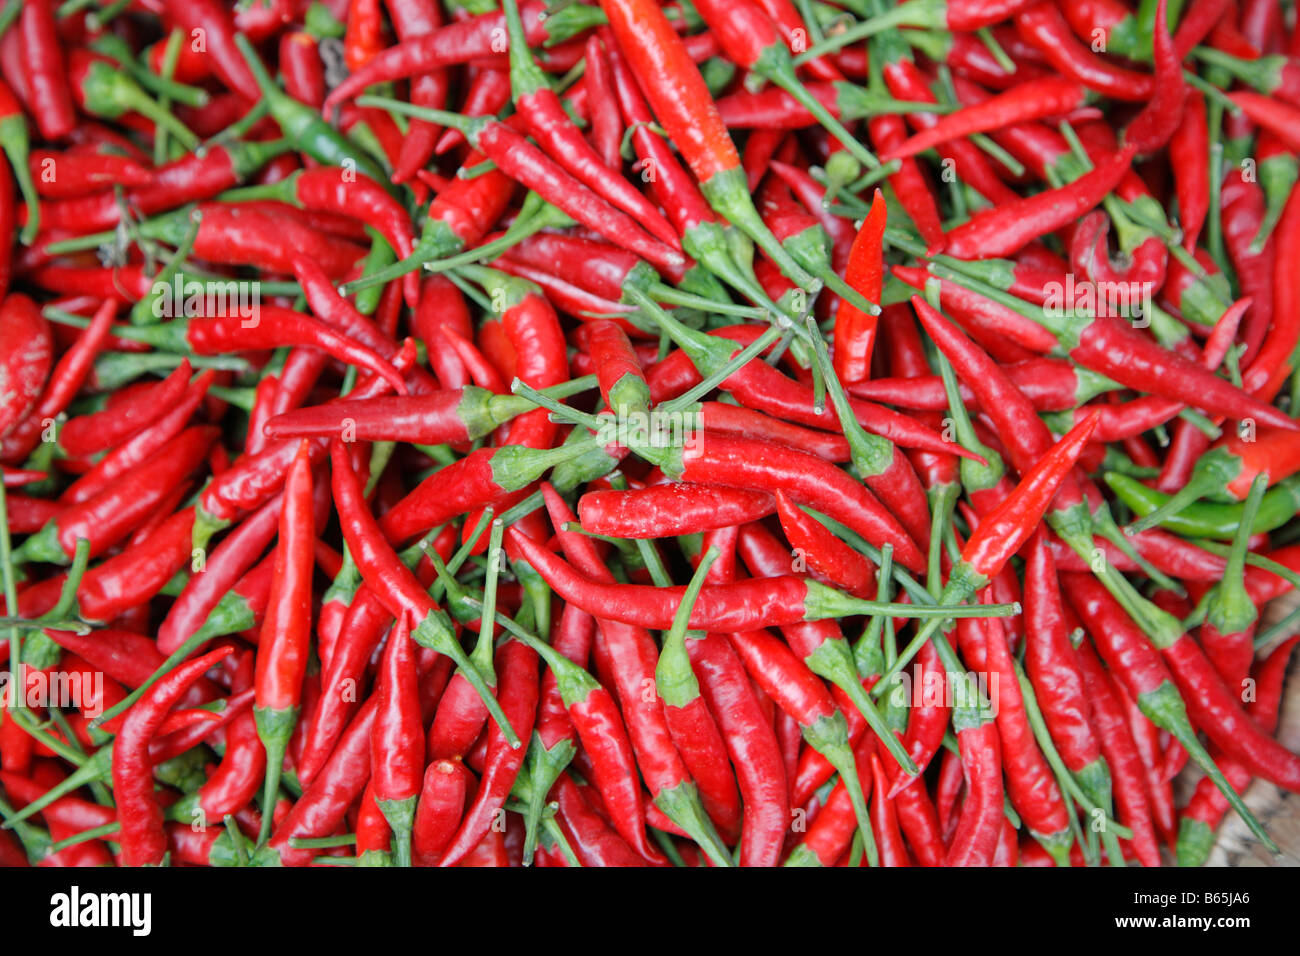 Red chili peppers, Market, Rabat, Morocco, Africa Stock Photo